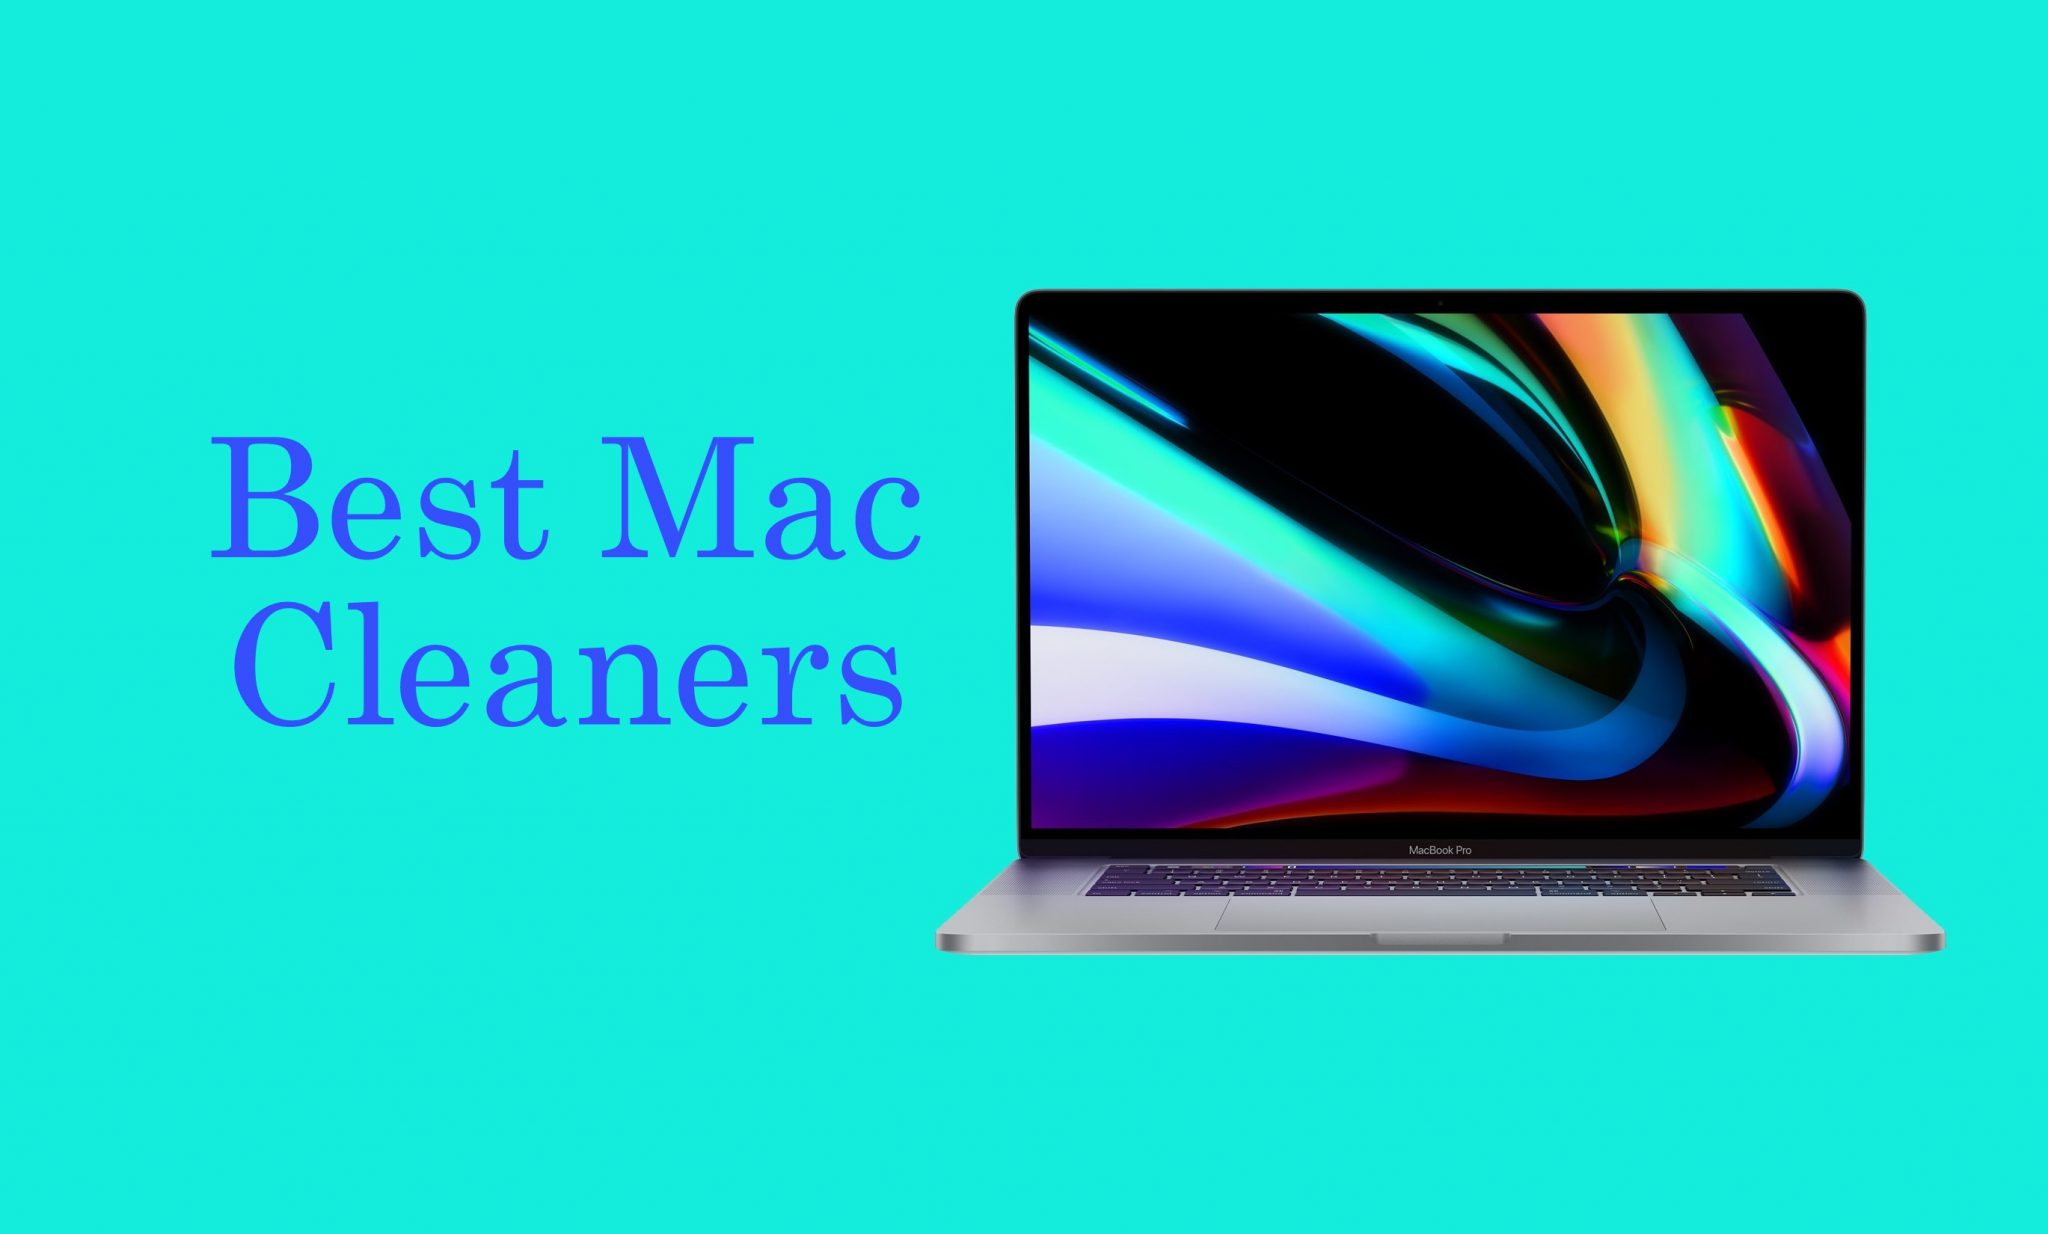 best duplicate cleaner for mac